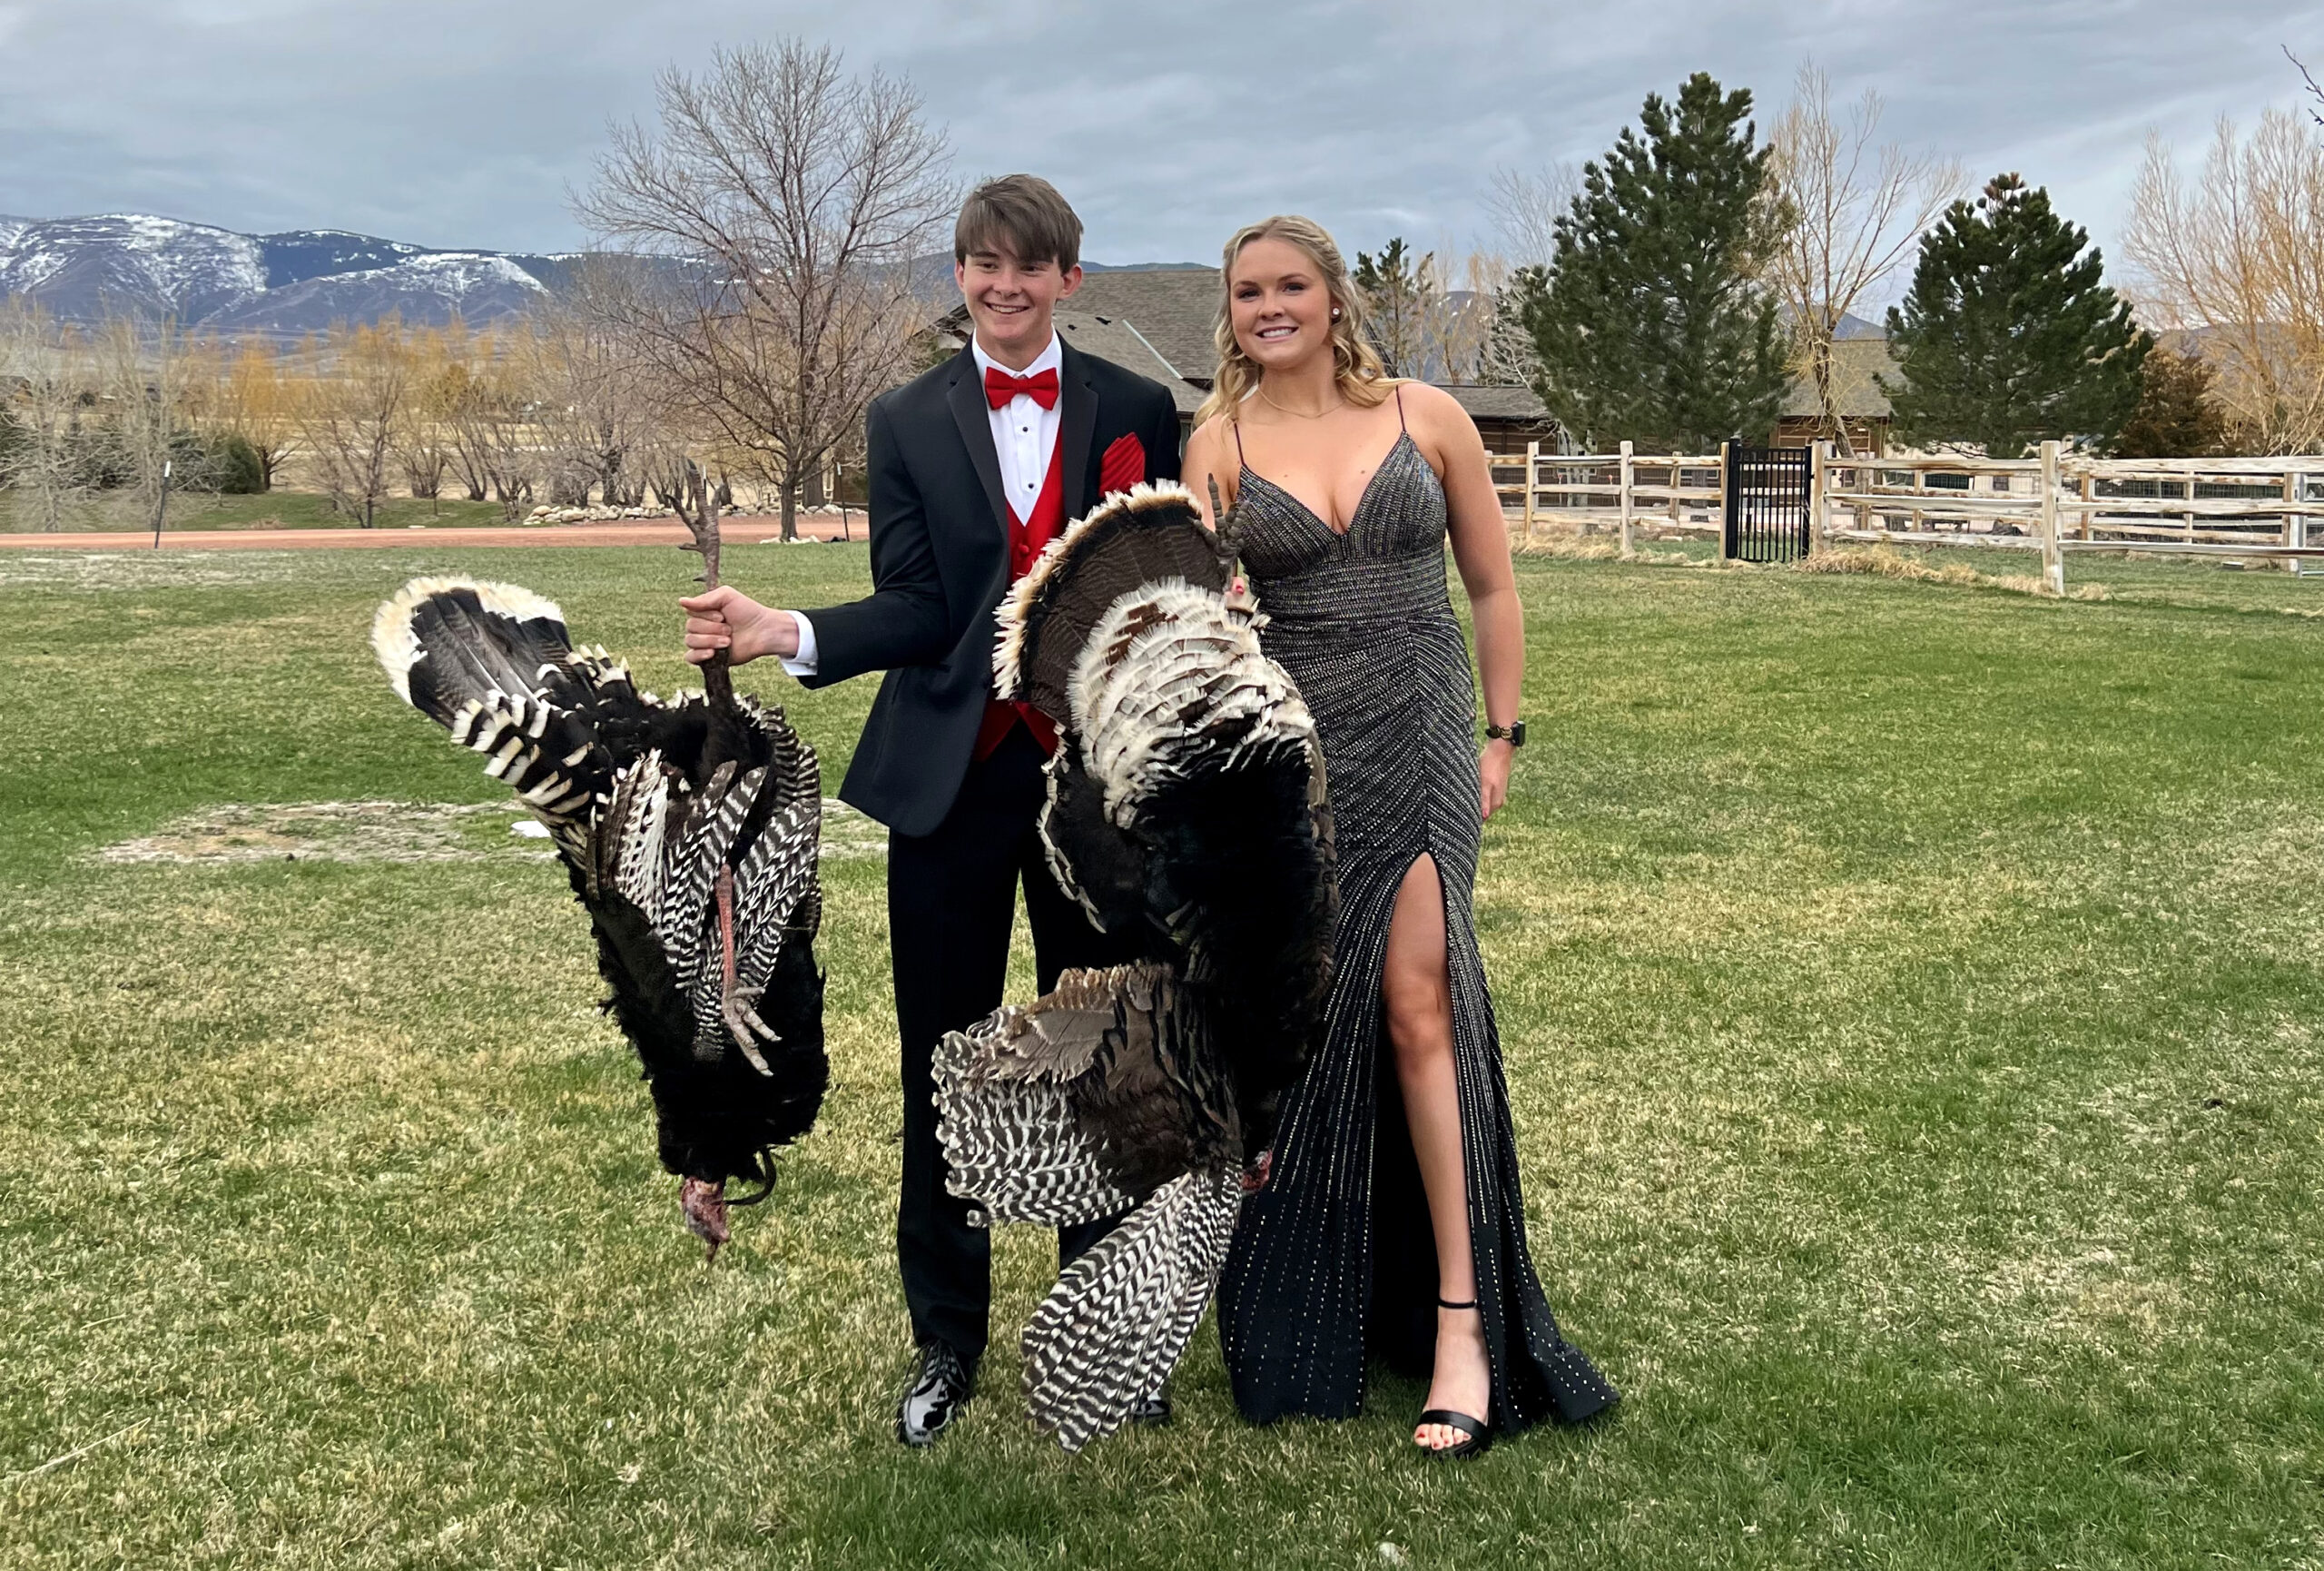 Two Wyoming teens with their turkeys before they head to prom.